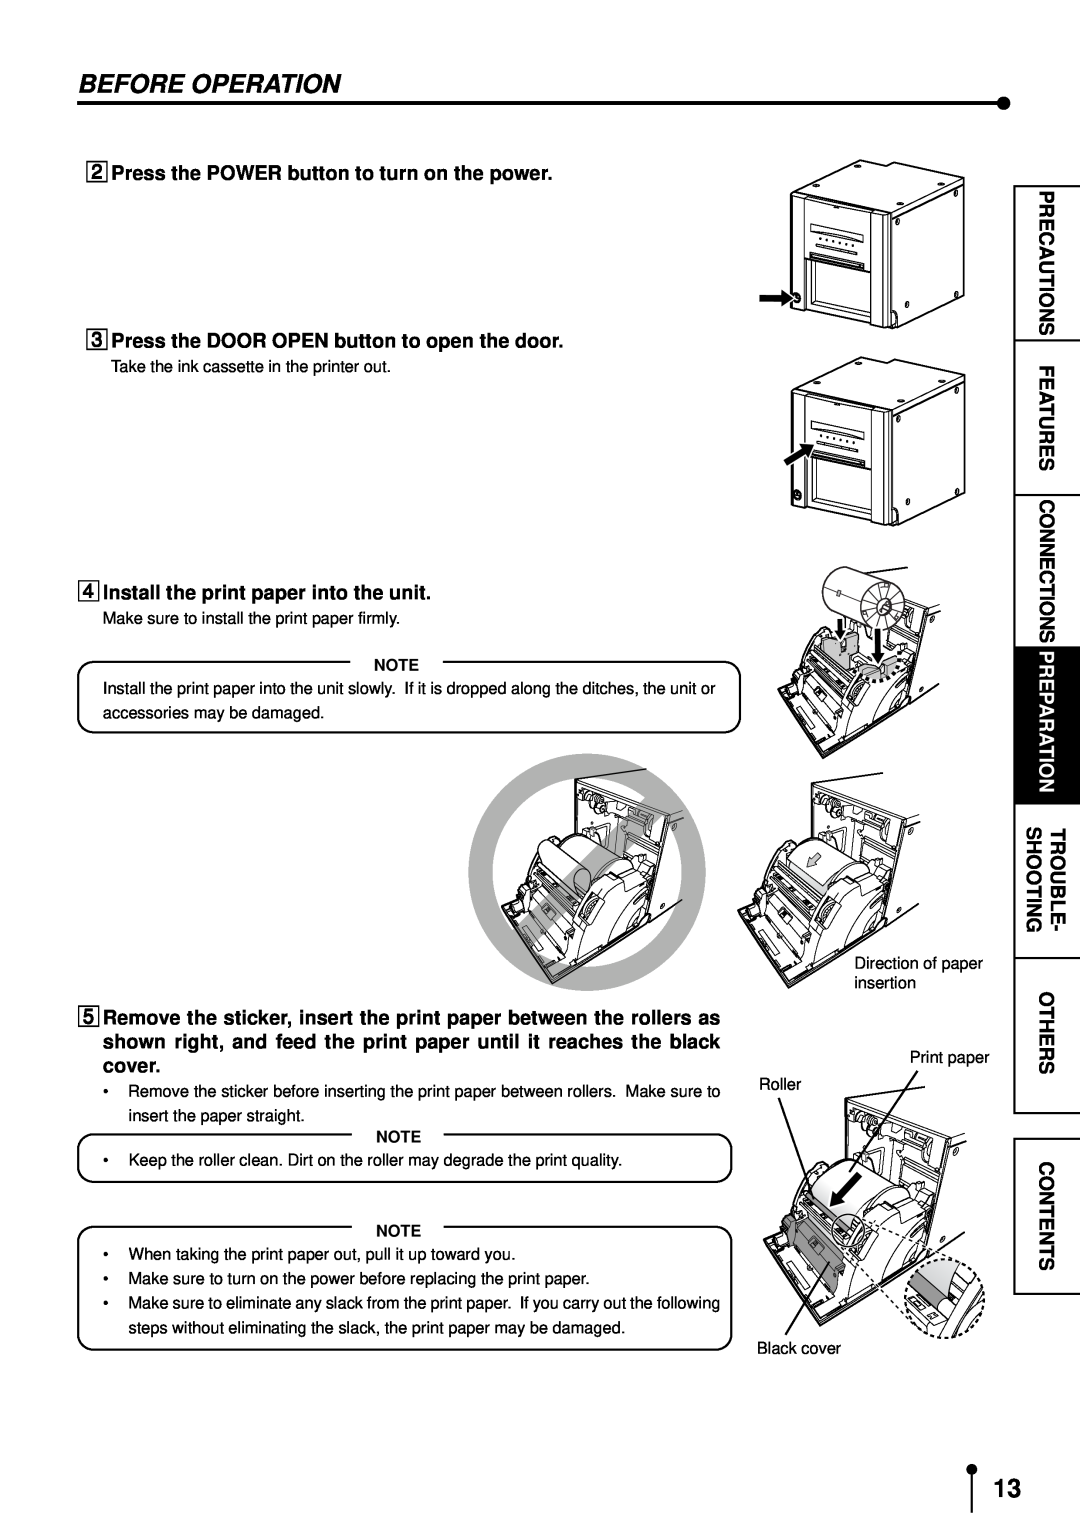 Mitsubishi Electronics CP9500DW operation manual Before Operation, Press the POWER button to turn on the power, Contents 